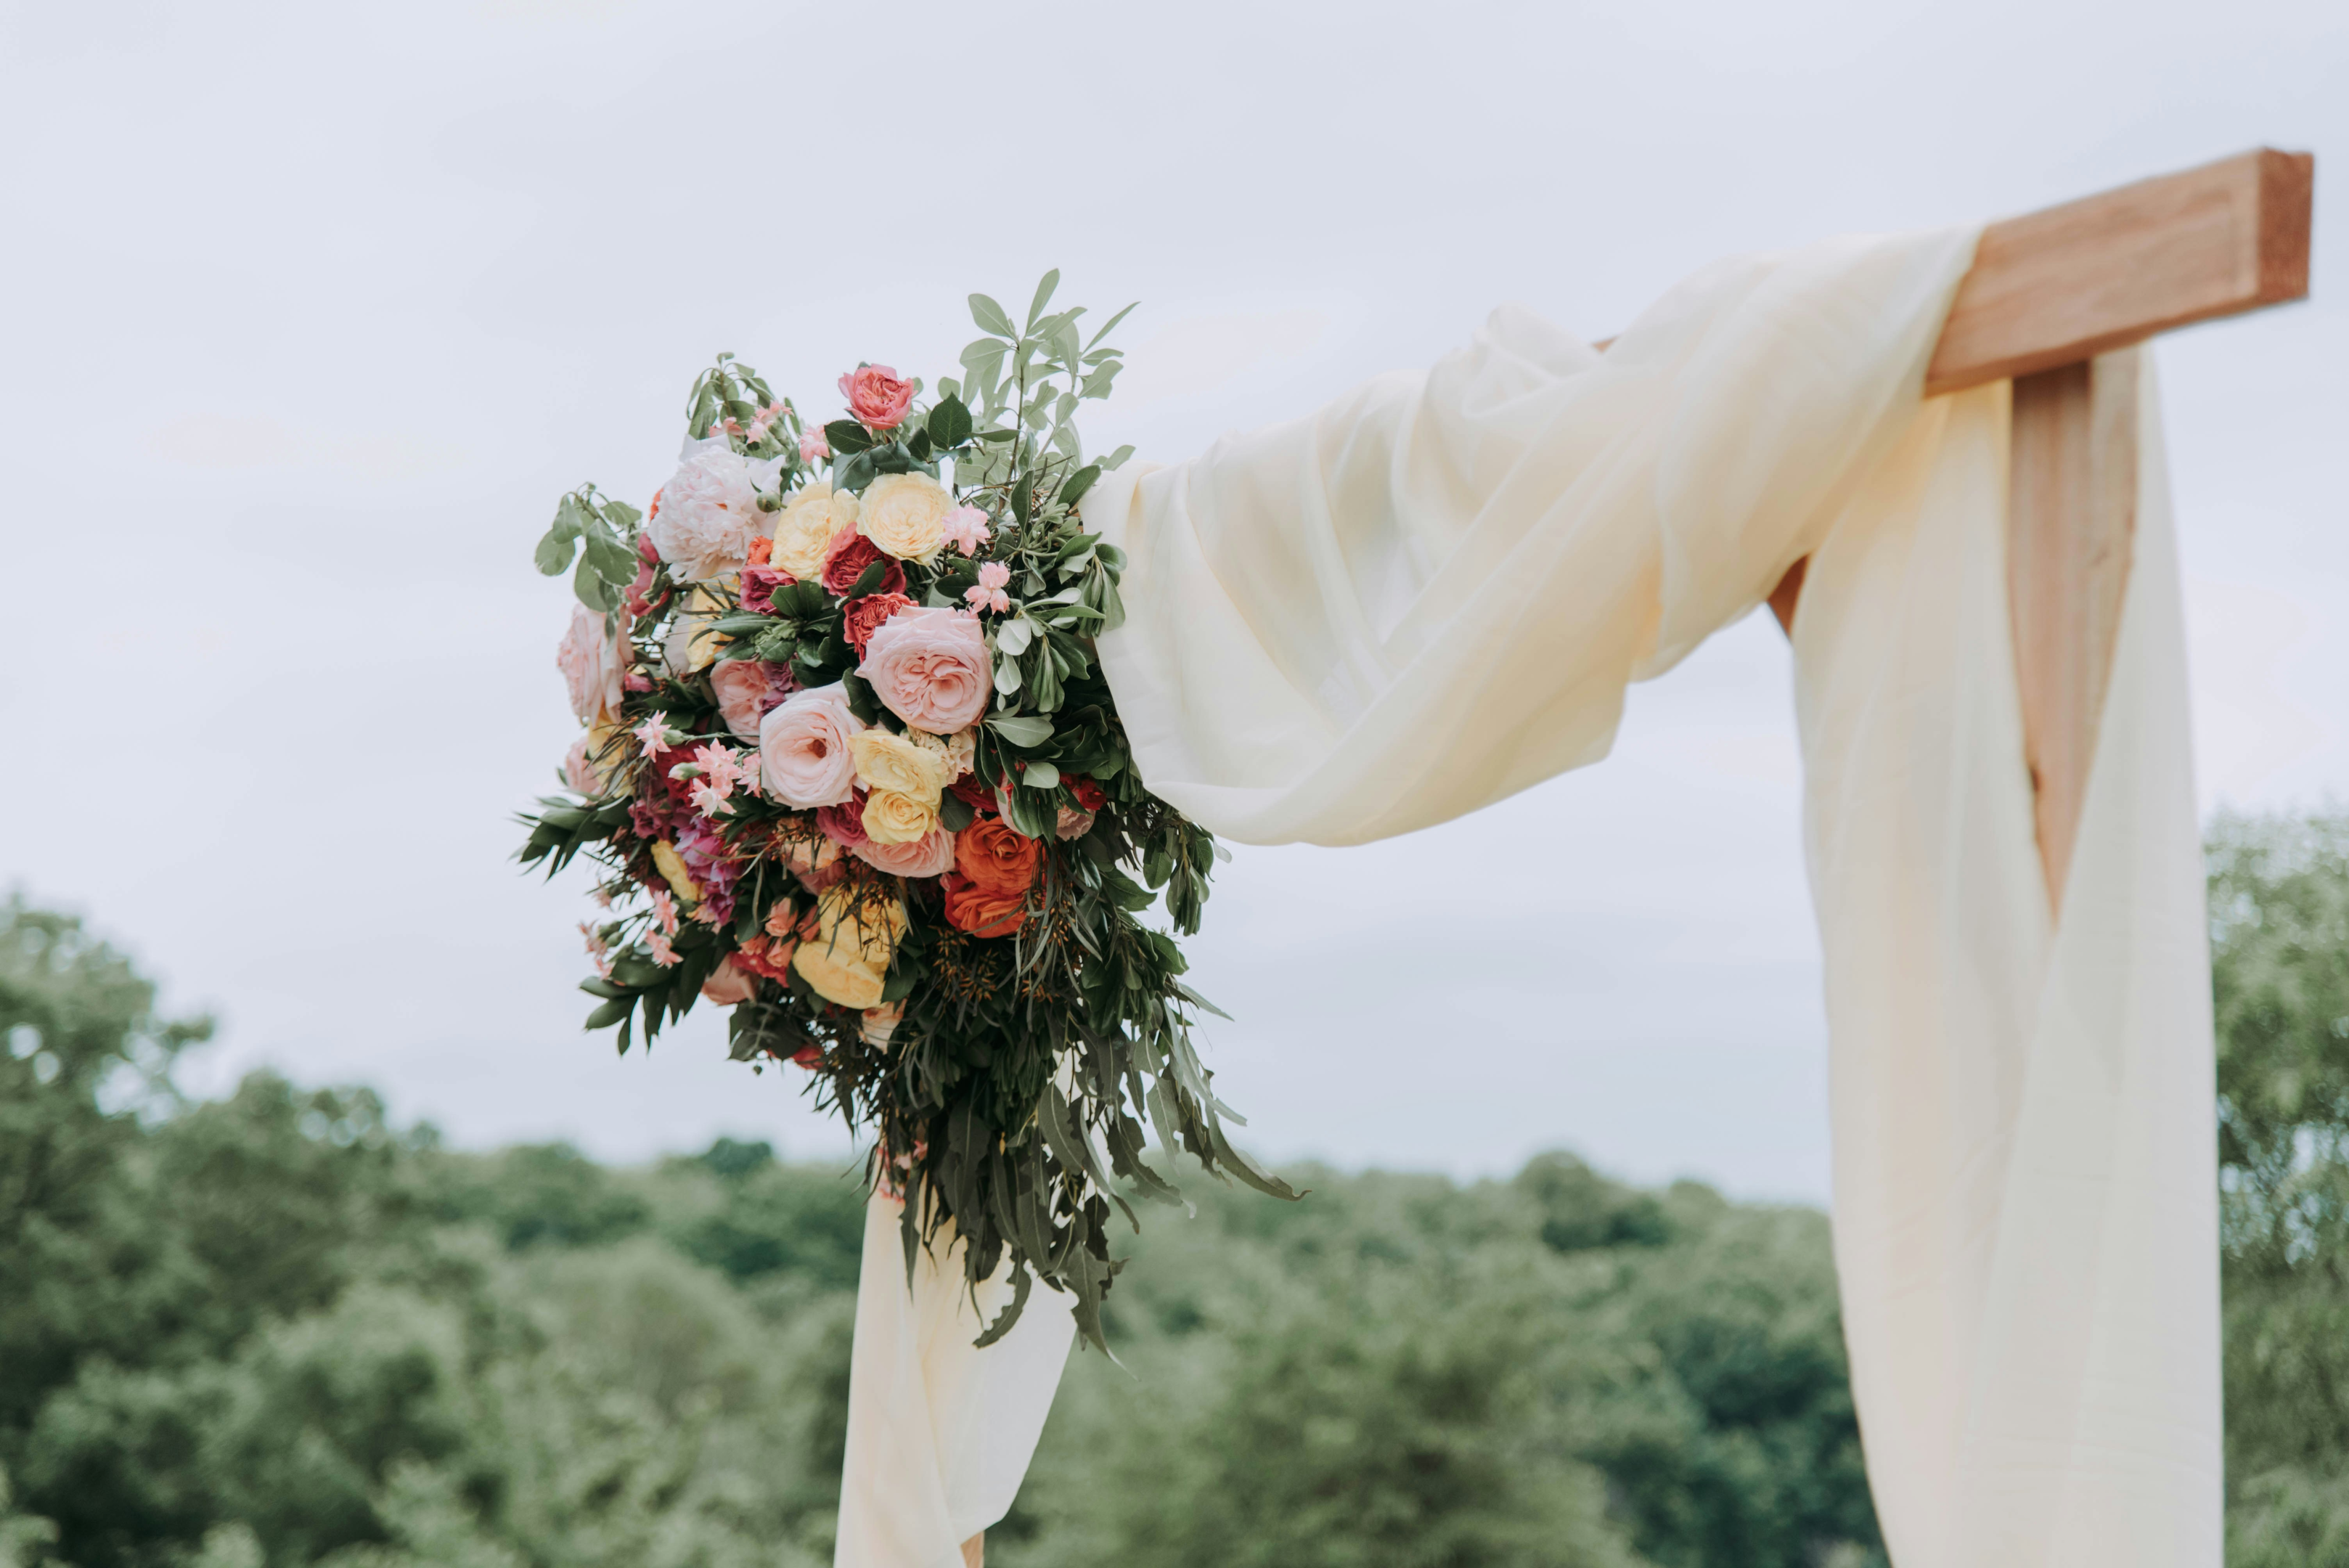 https://unsplash.com/photos/bouquet-of-assorted-color-flowers-hanged-on-brown-plank-with-white-textile-x40Q9jrEVT0